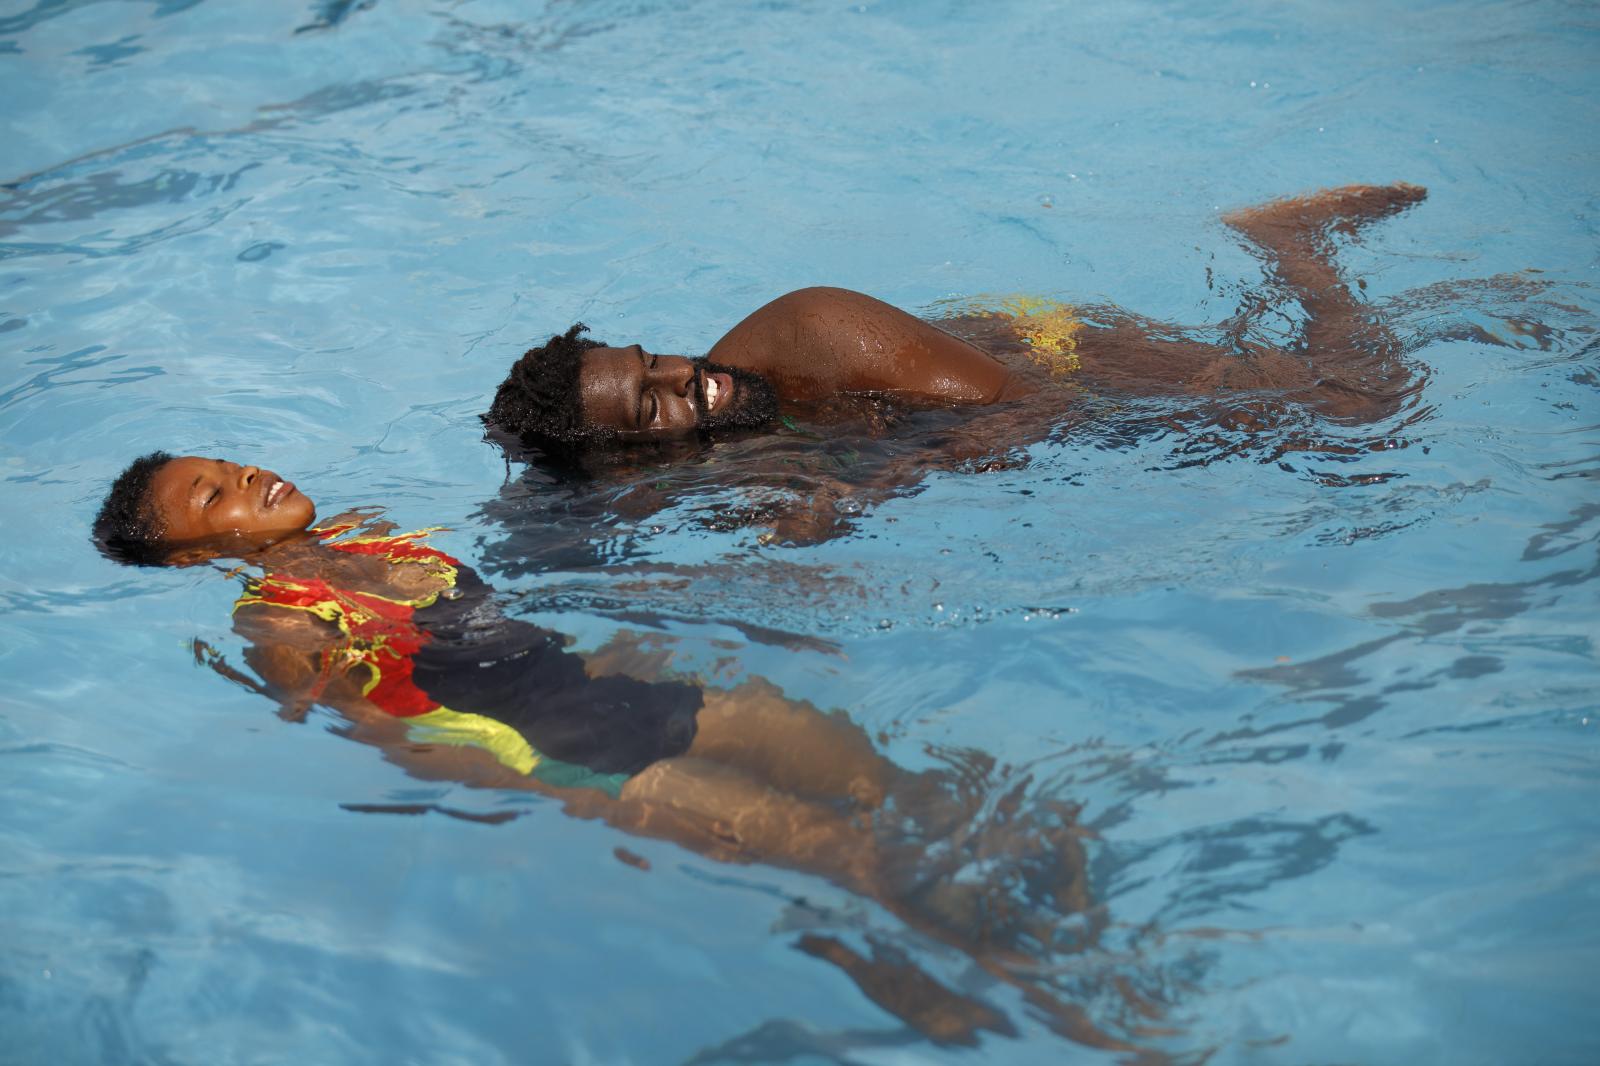 Image from Water Polo - Prince Asante, the founder of Ghana's Awatu Winton...